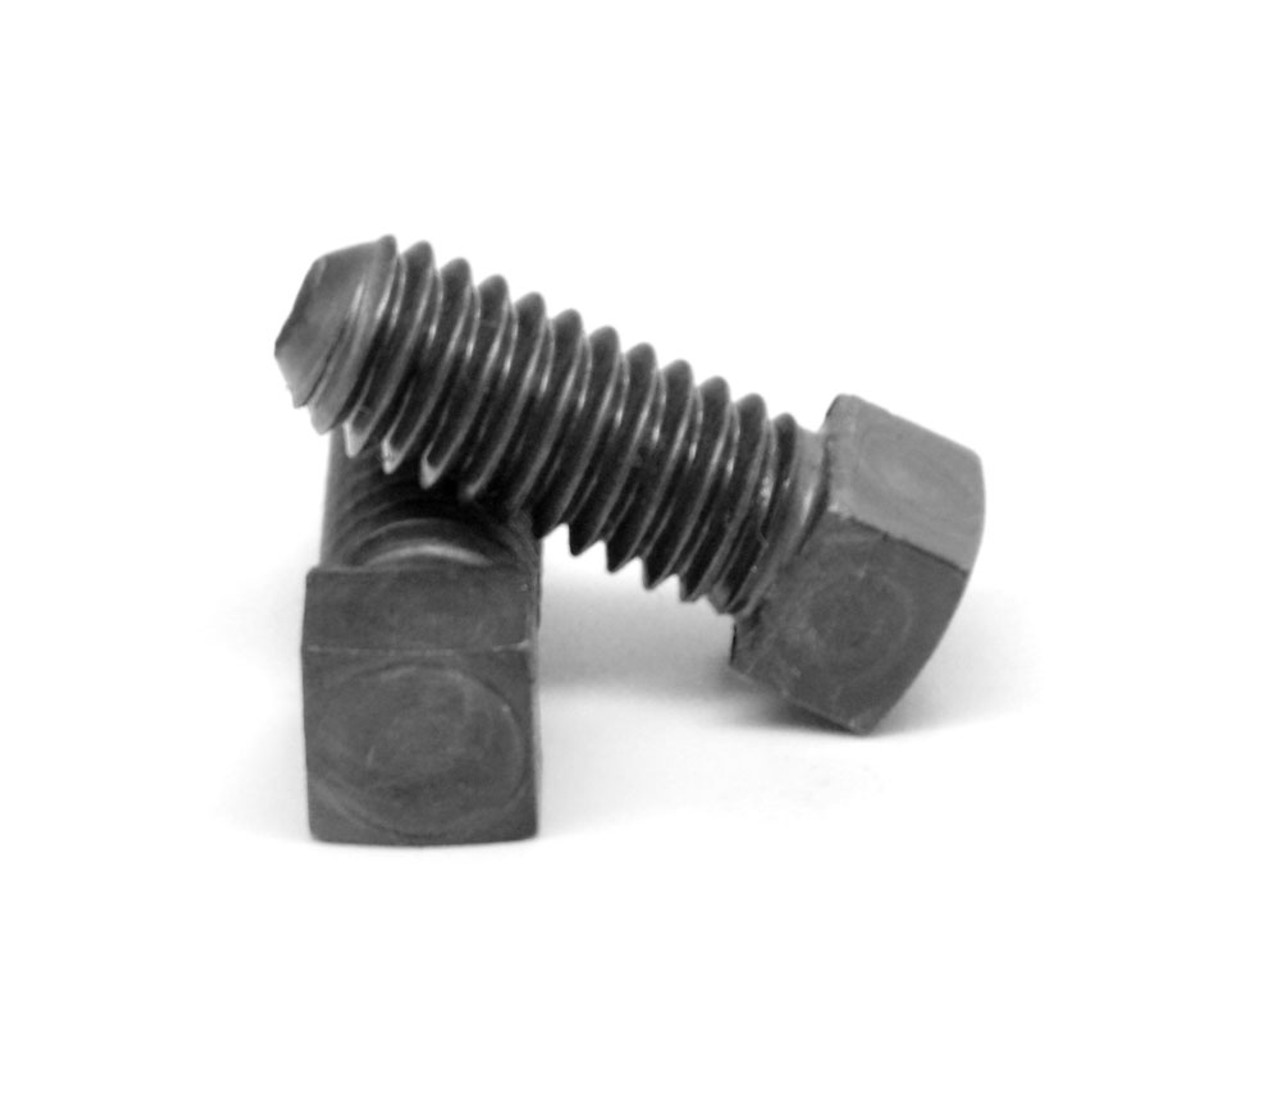 3/4"-10 x 2 1/2" (FT) Coarse Thread Square Head Set Screw Oval Point Low Carbon Steel Case Hardened Plain Finish